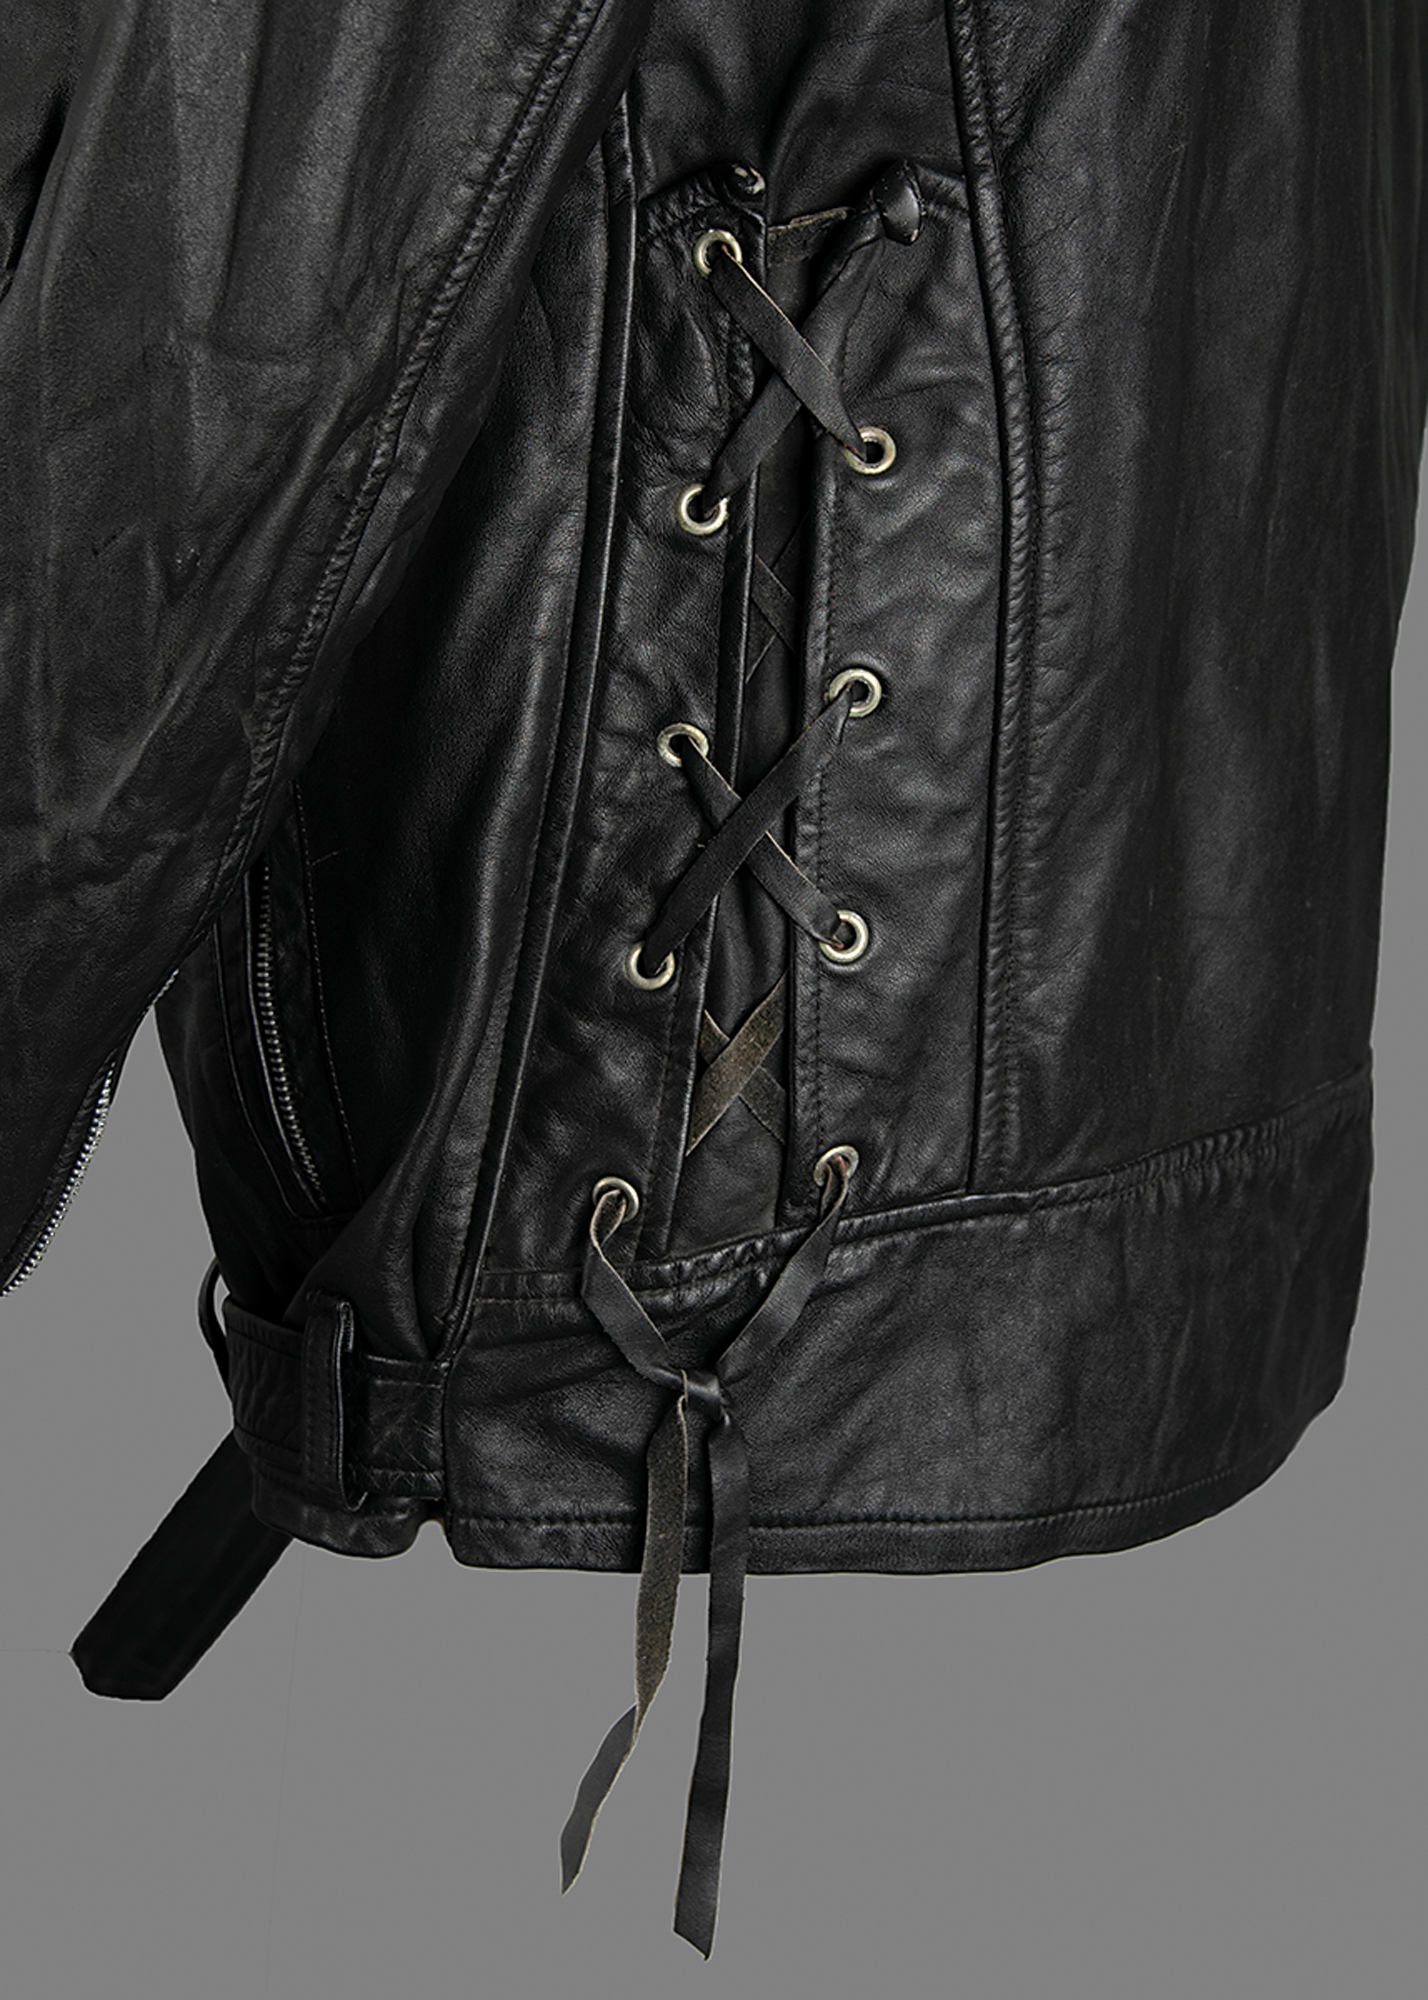 Joey Ramone's Stage-Worn Leather Jacket | RR Auction